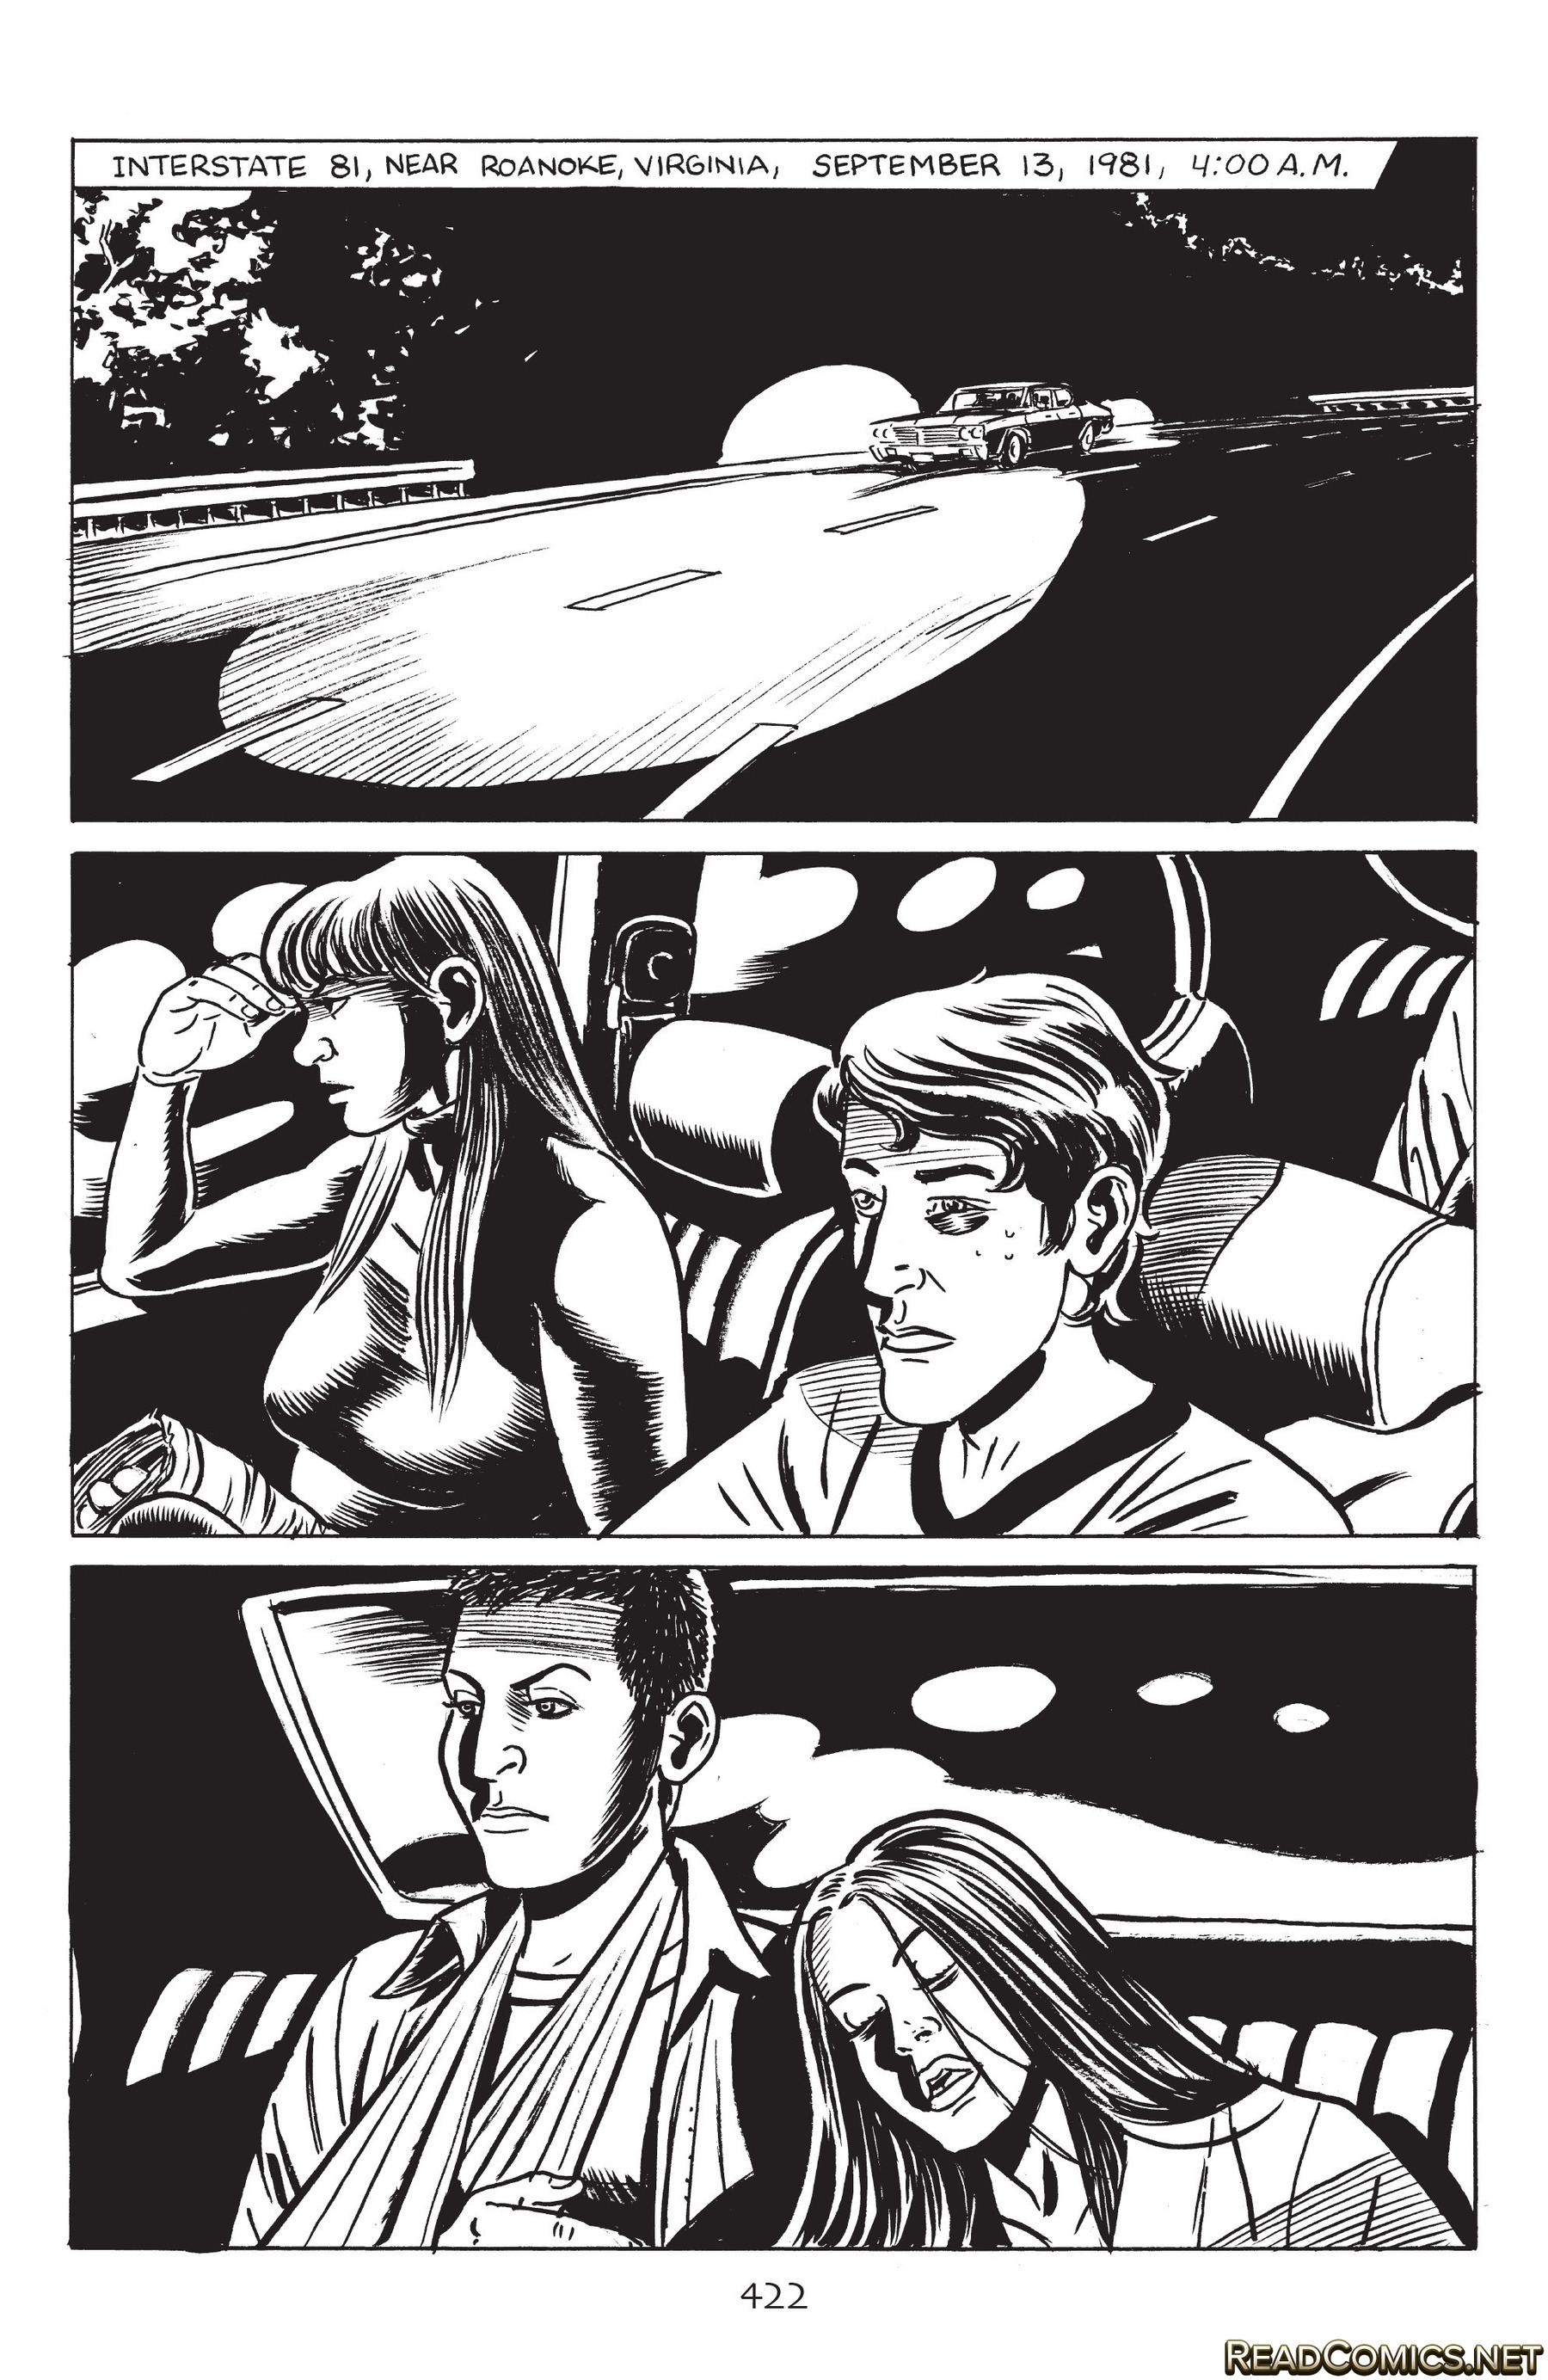 Stray Bullets: Sunshine & Roses (2015-): Chapter 16 - Page 3